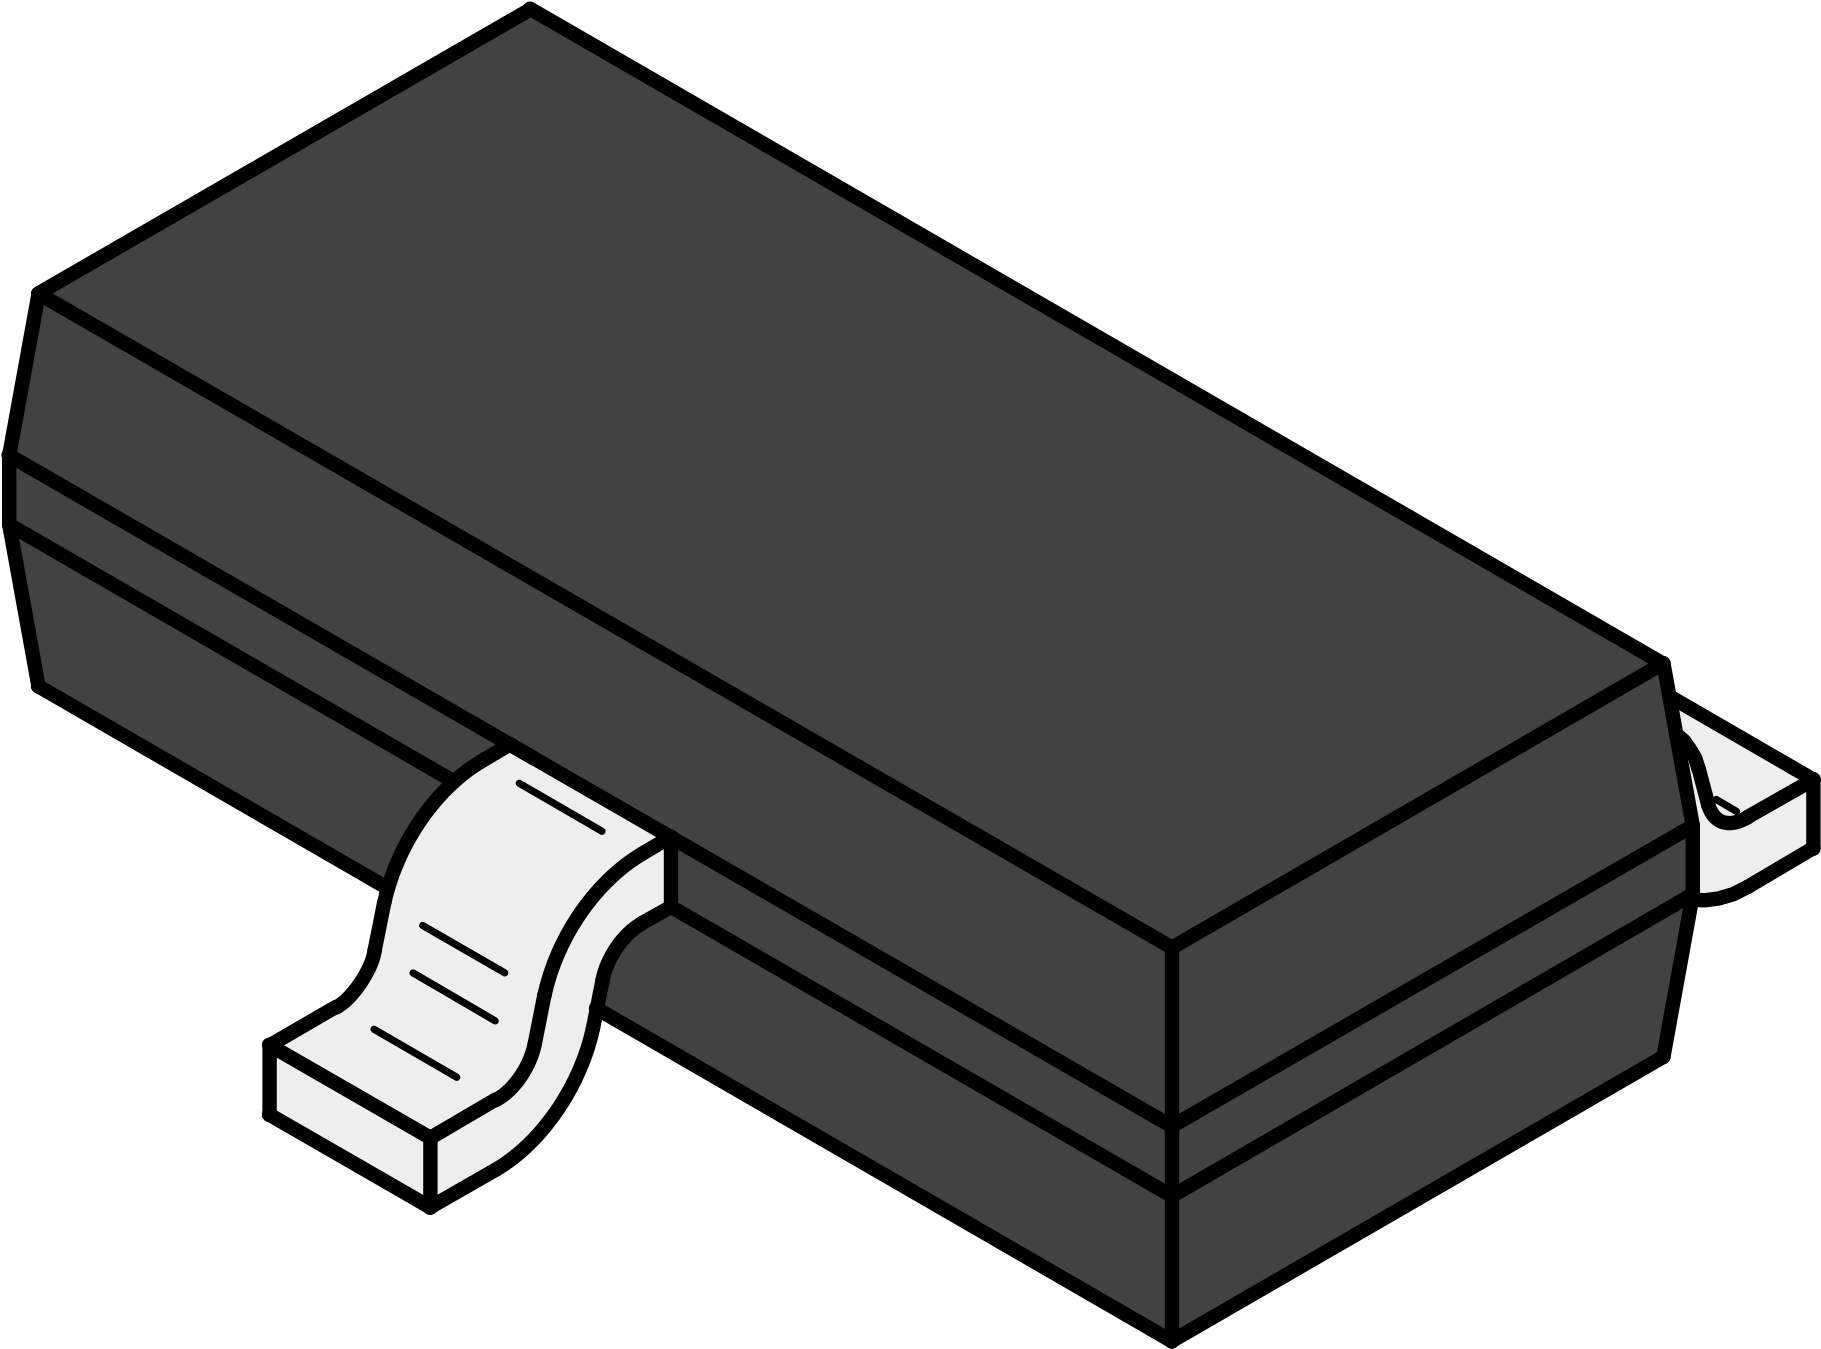 A Black Rectangular Object With A White Label